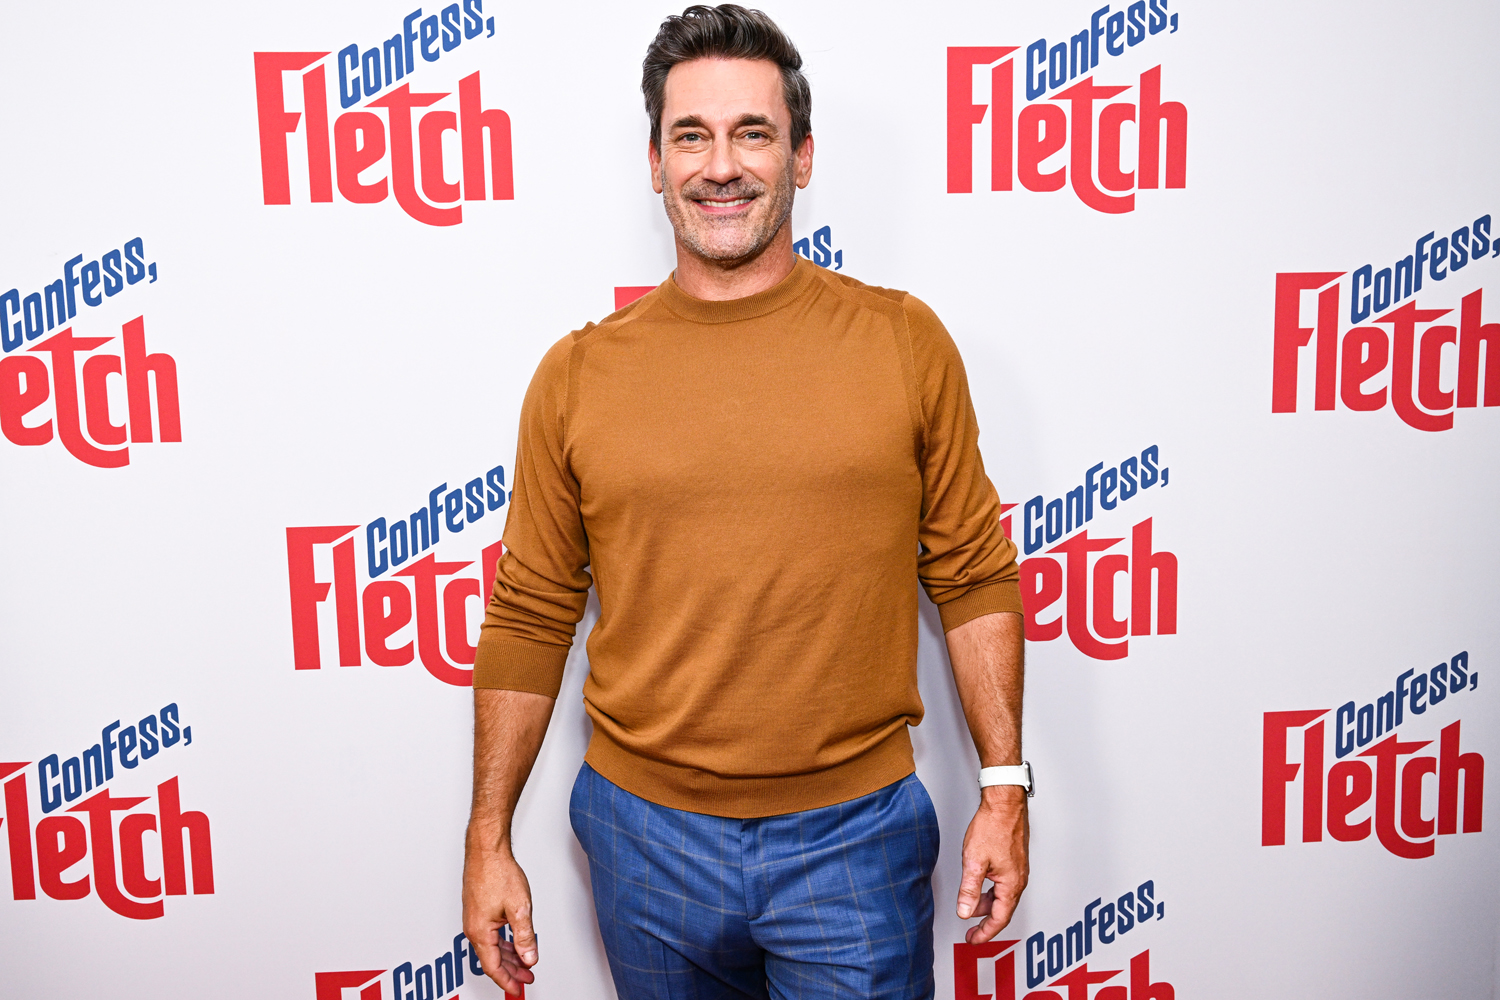 Jon Hamm attends a special screening of Miramax's "Confess, Fletch" at The West Hollywood EDITION